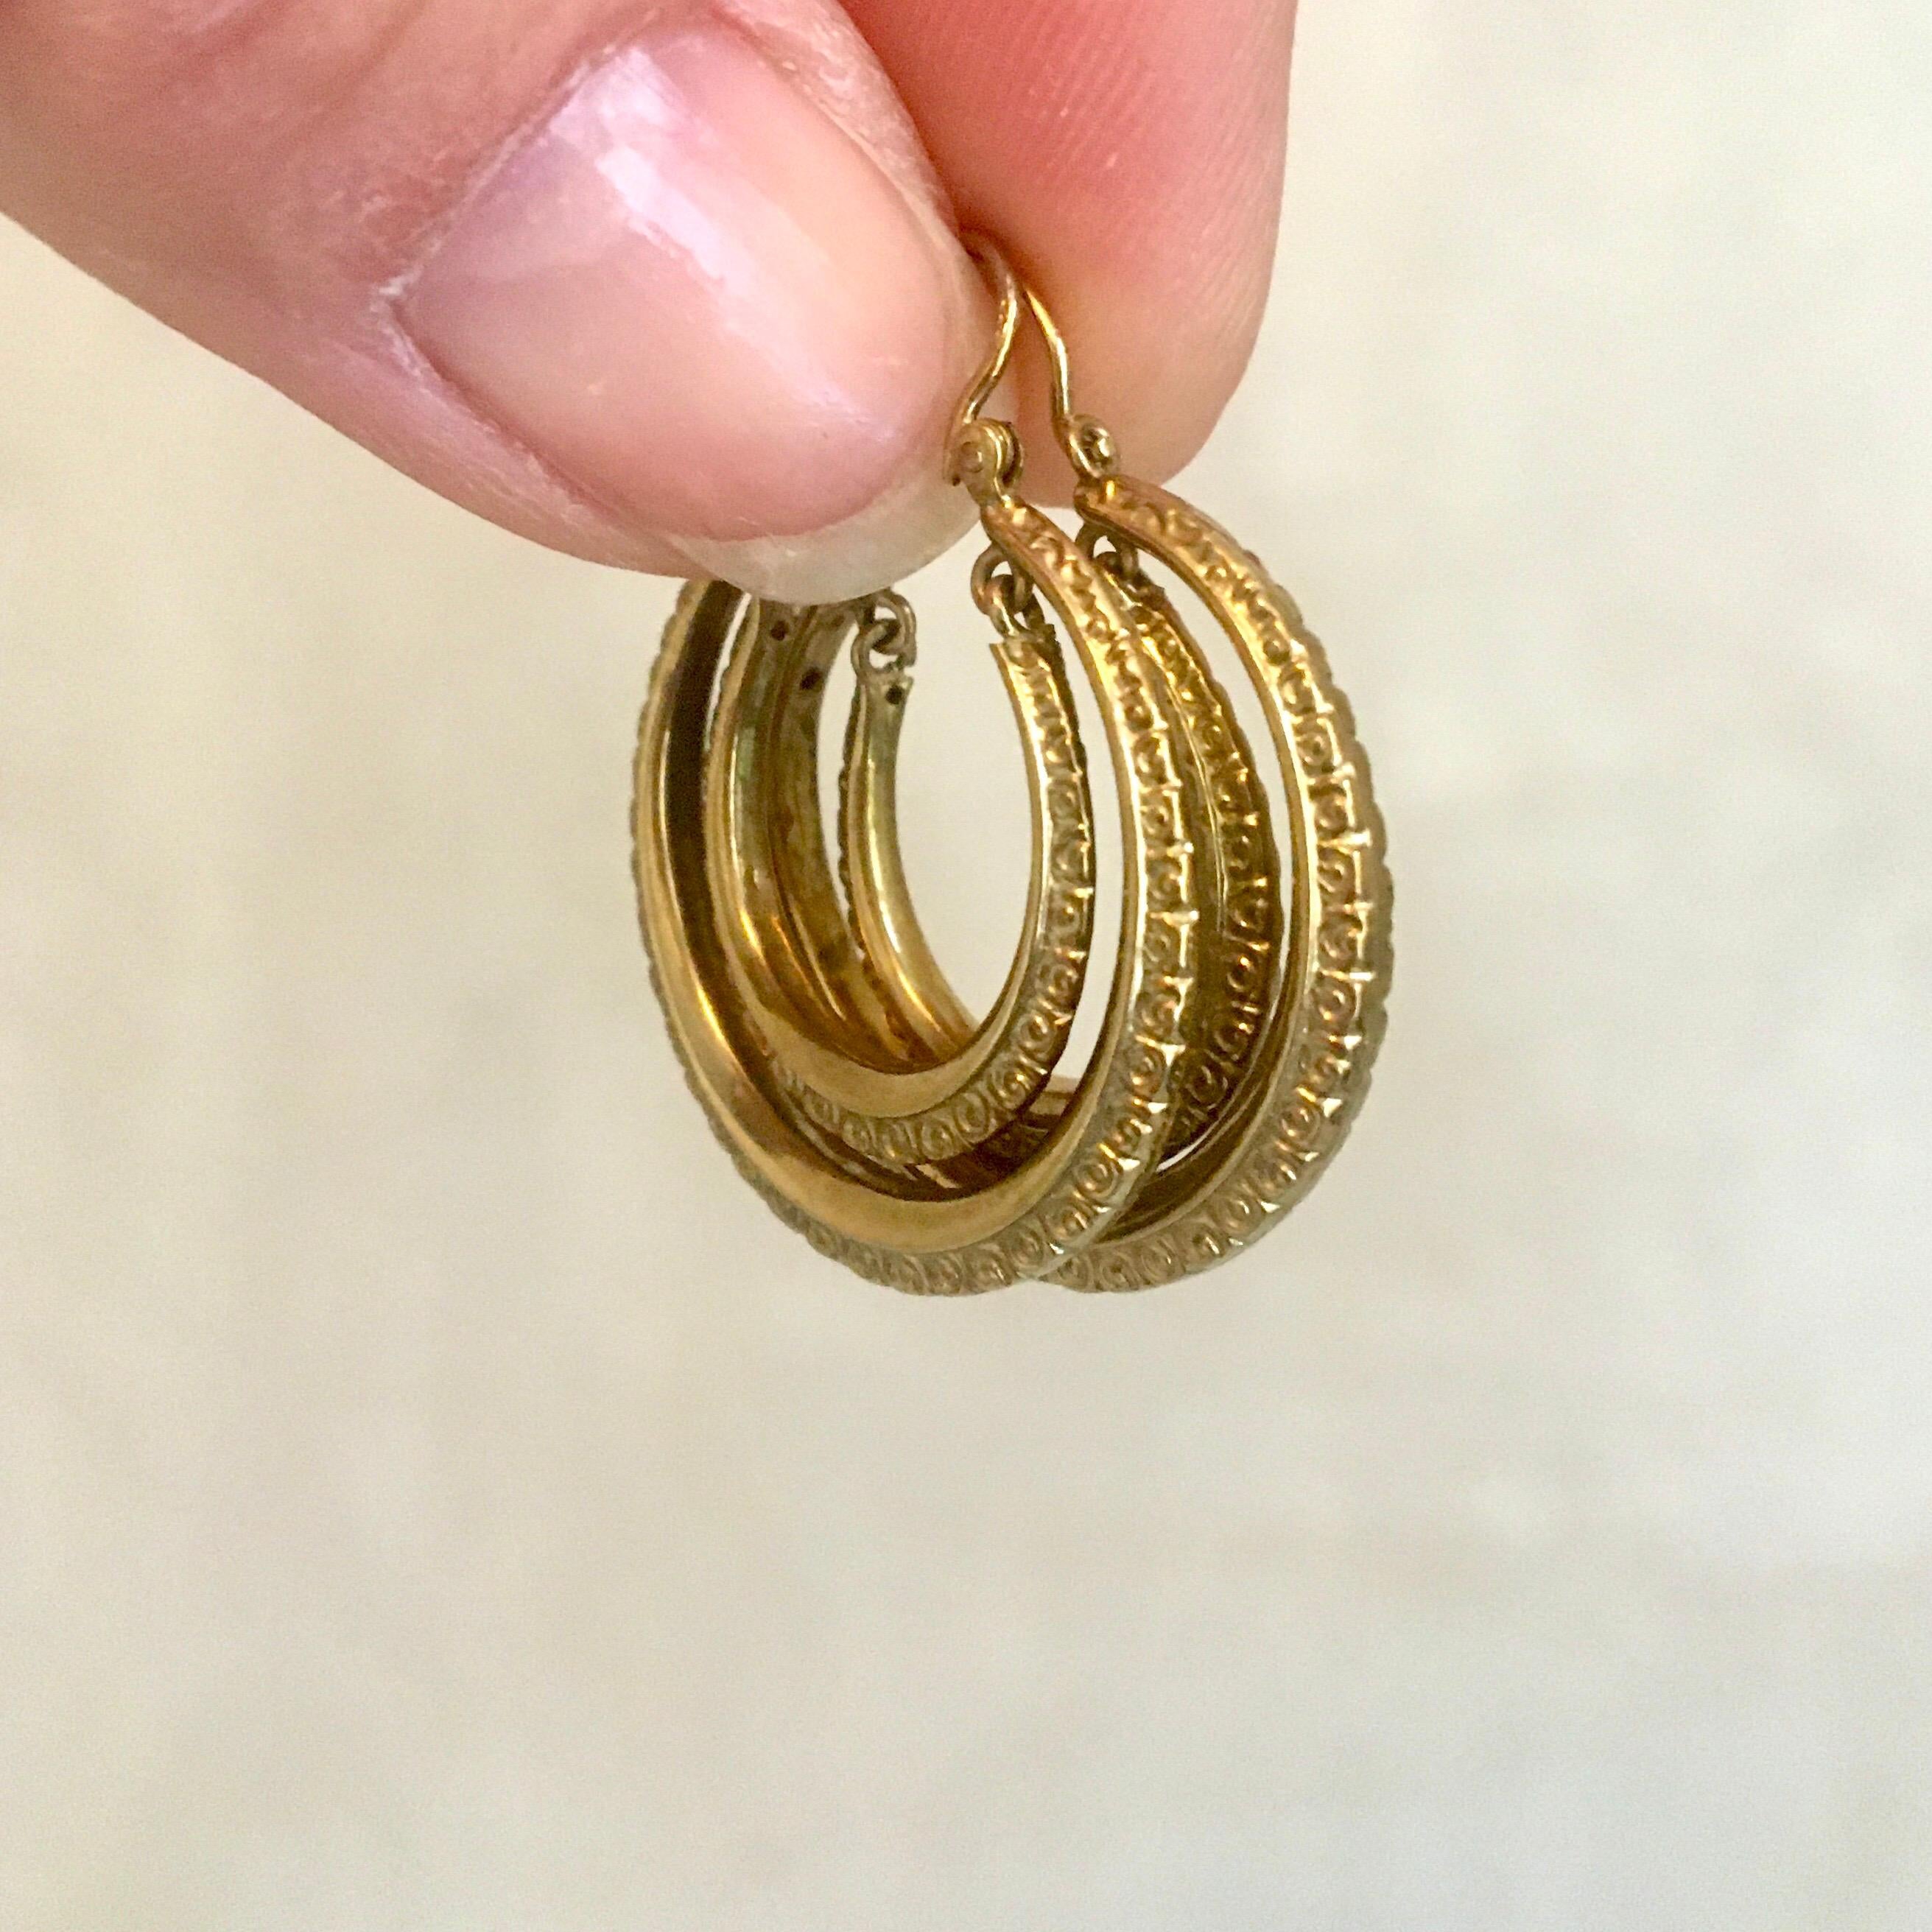 Pair of gold double creole hoop earrings. The earrings have a beautifully engraved design on the hoops. The earrings are lovely and special with their classic pattern double hoops. These kinds of jewels represent a varied and rich historical Dutch